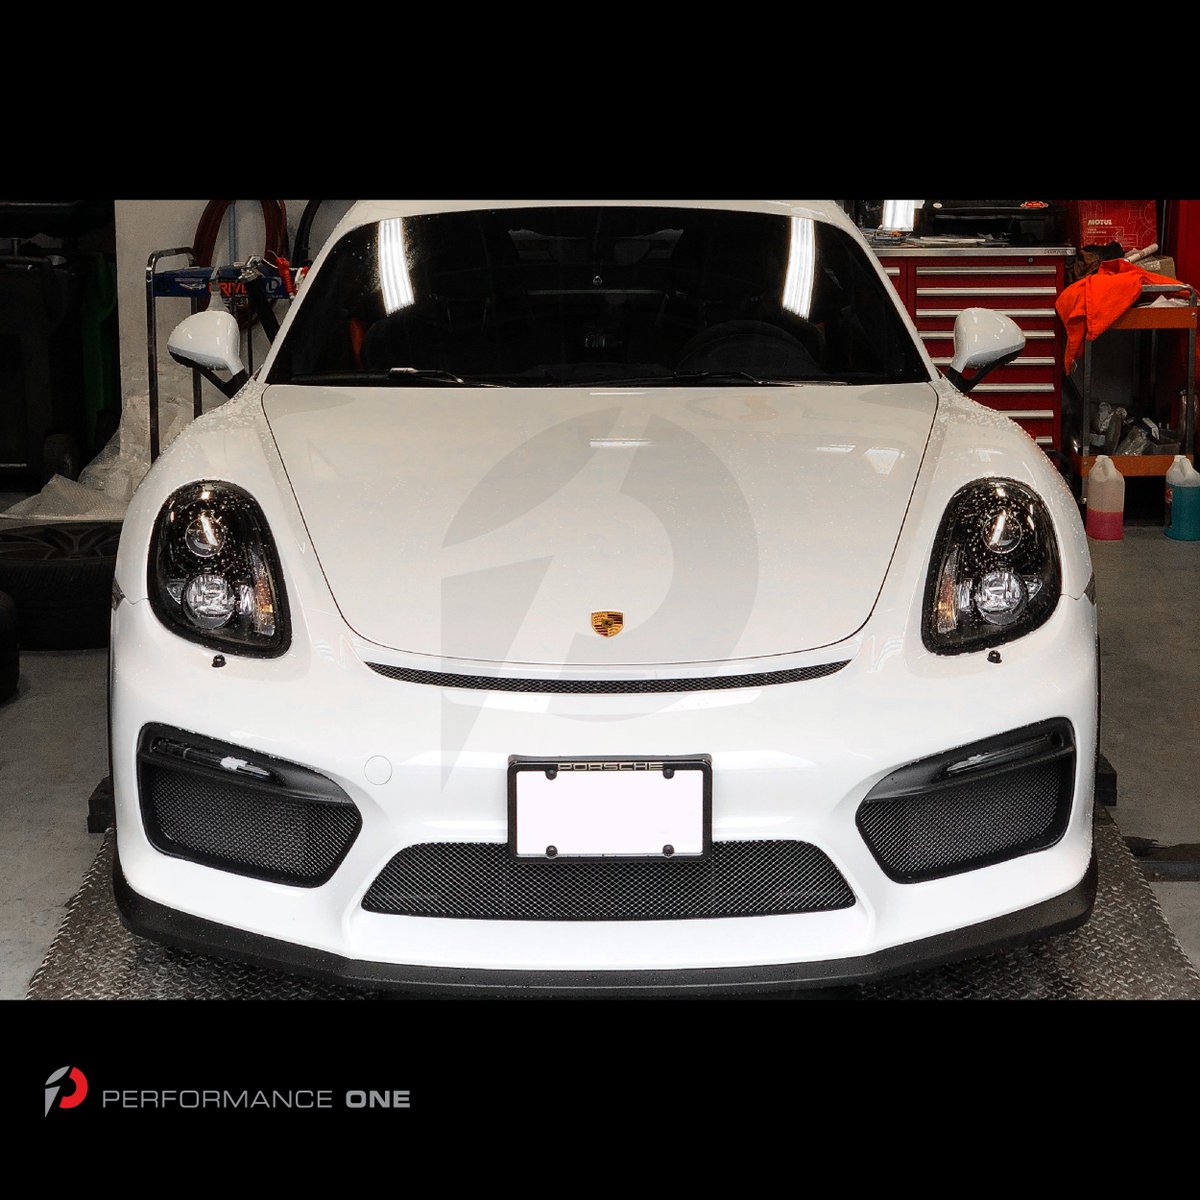 #frontendfriday • Daily life @performanceone From #performanceupgrades to regular #maintenance & #service • #fef #PorscheCaymanGT4 #CaymanGT4 #Cayman #PorscheCayman #Porsche #Porsche981 #porschemotorsport #porscheperformance #motorsport #modifications #shoplife #dailygrind